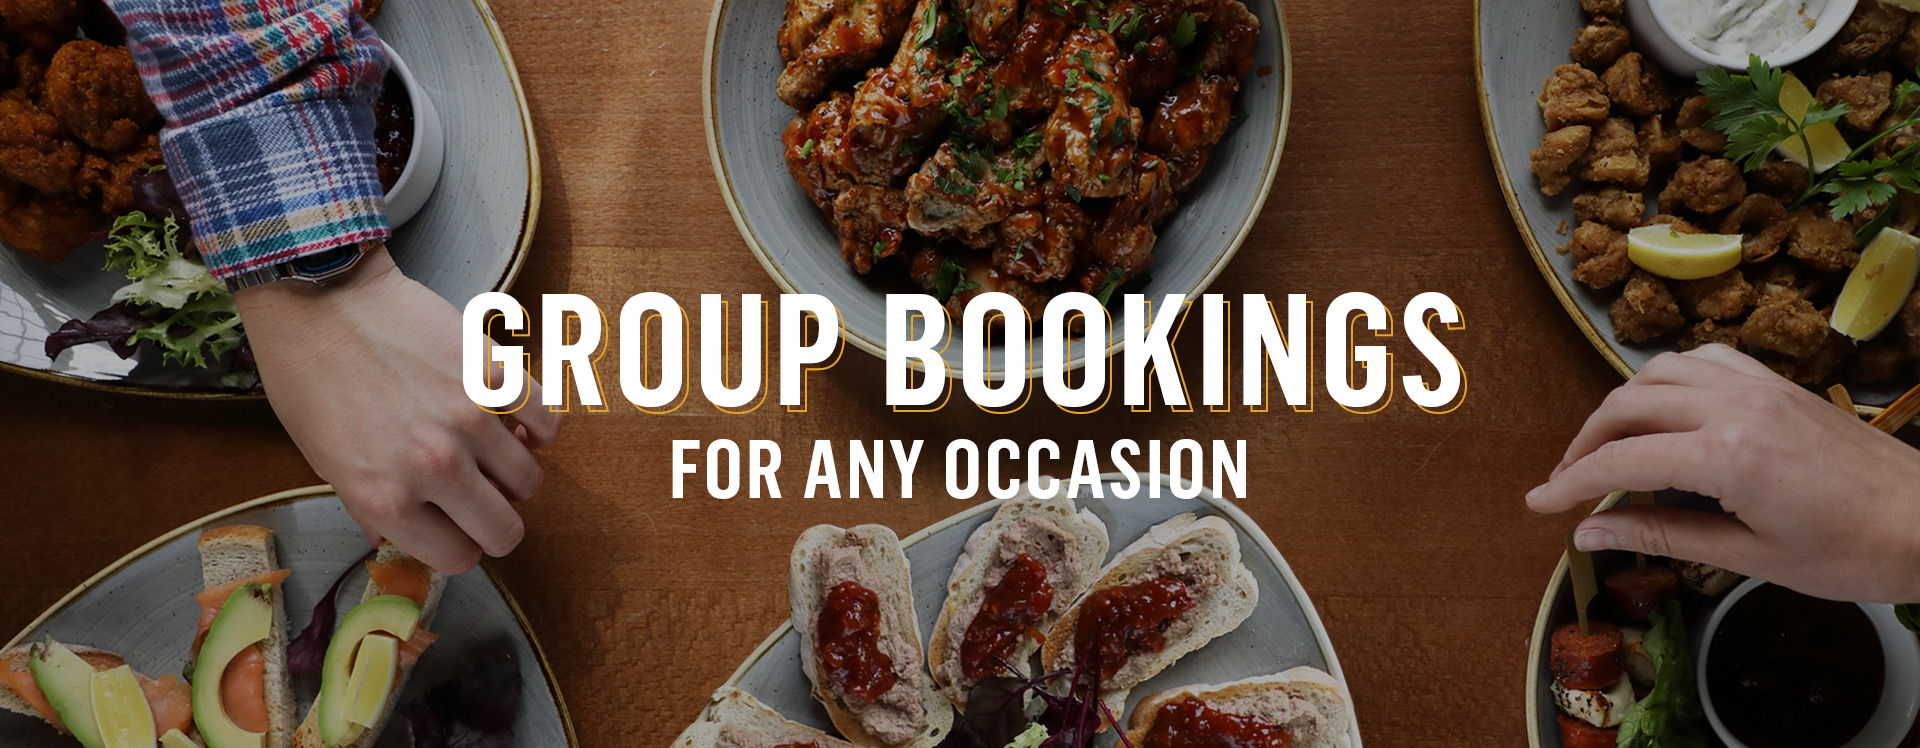 Group Bookings at Harkers